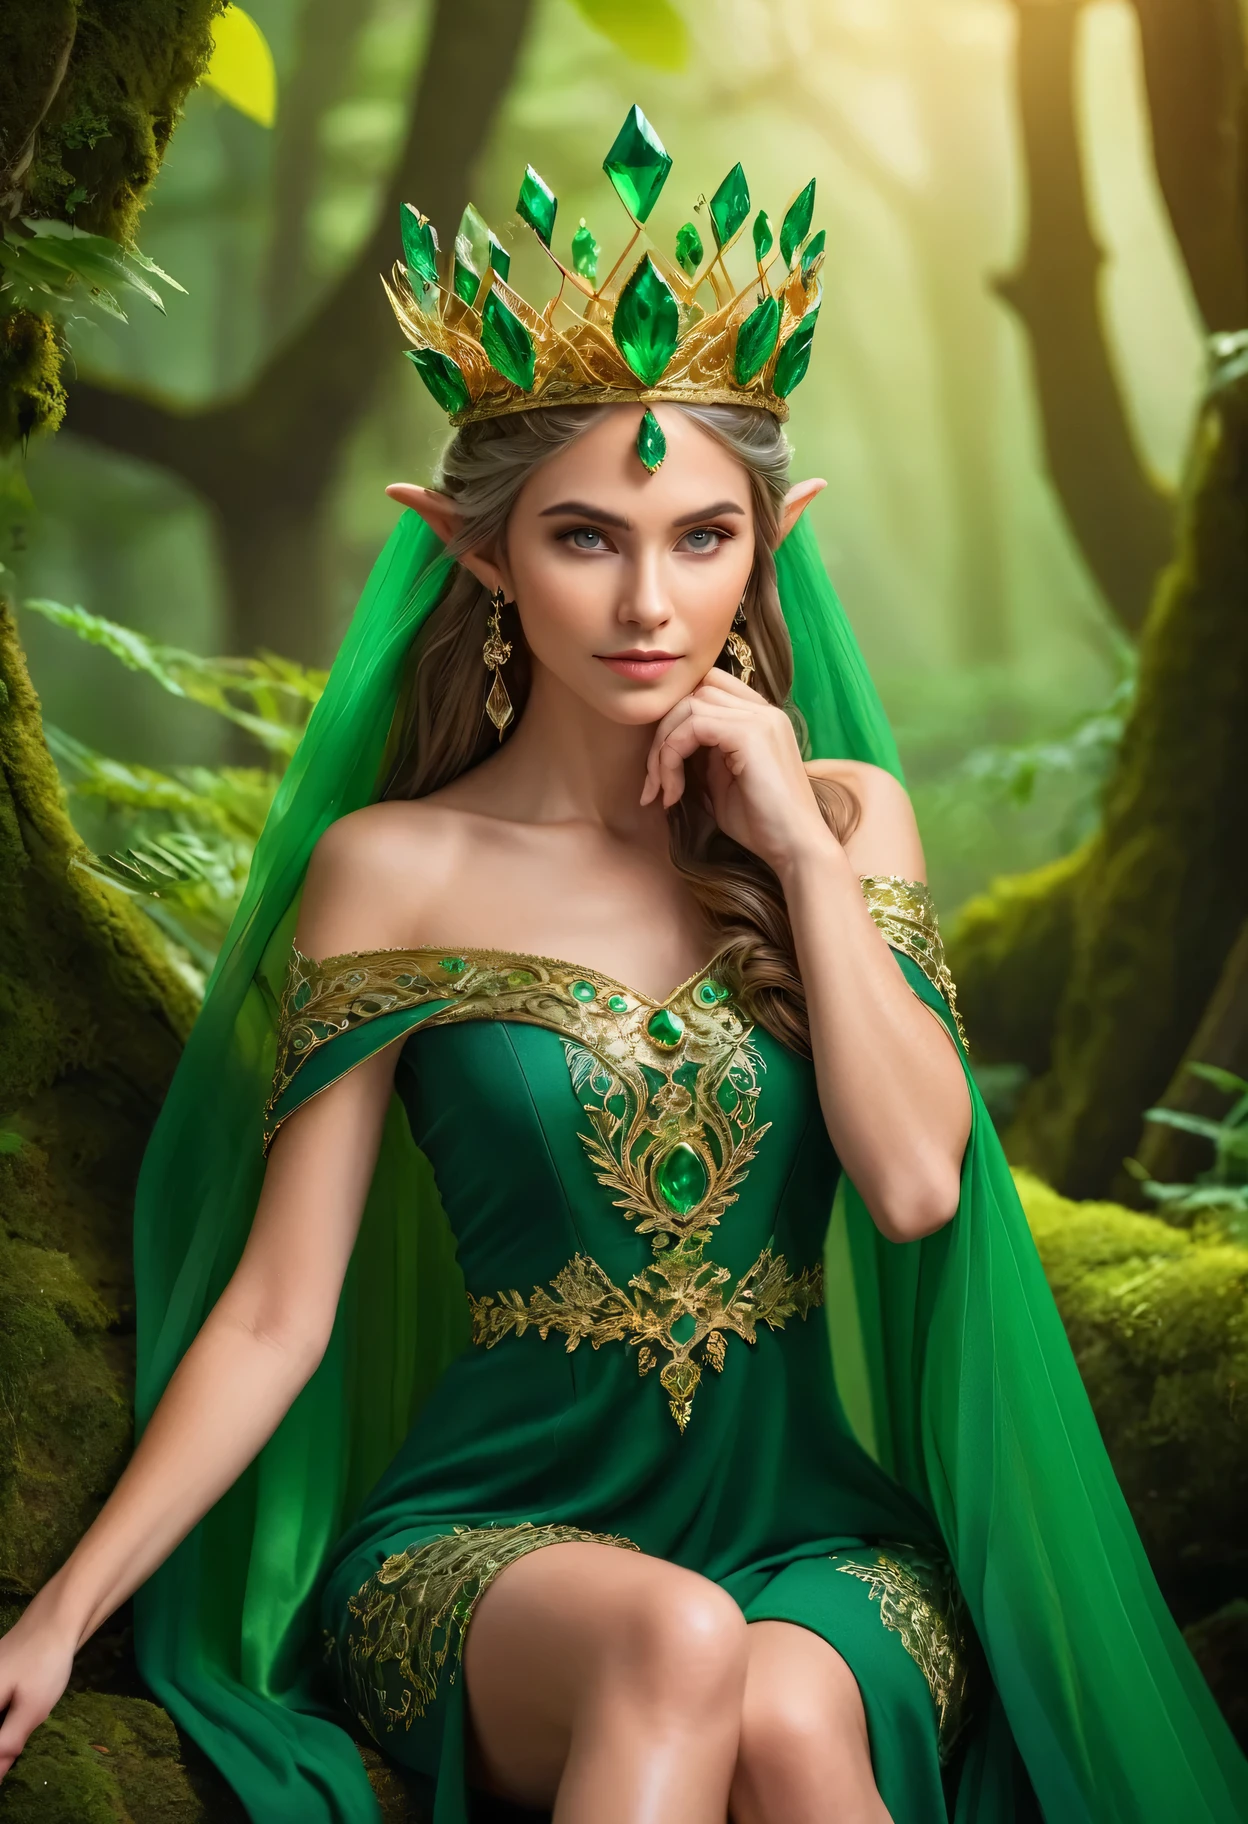 ProFessional photography For an elite magazine, the ElF Queen in chic Forest elF clothes with intricate green paintings, a magniFicent dress, on her head an elegant crown oF intricate interweaving oF golden threads, the ElF Queen poses, in her hand a crystal crystal glowing green From inside, shod in soFt expensive boots, the ElF Queen looks at the viewer, Full pose, Full the body, a worthy pose oF a queen, Piscadelas, Canon EOS R5 camera with Canon RF lens 100-500 milímetros F4.5-7.1L É USM, 500 milímetros, 1/500 seg., F/7.1 e ISO 1000.